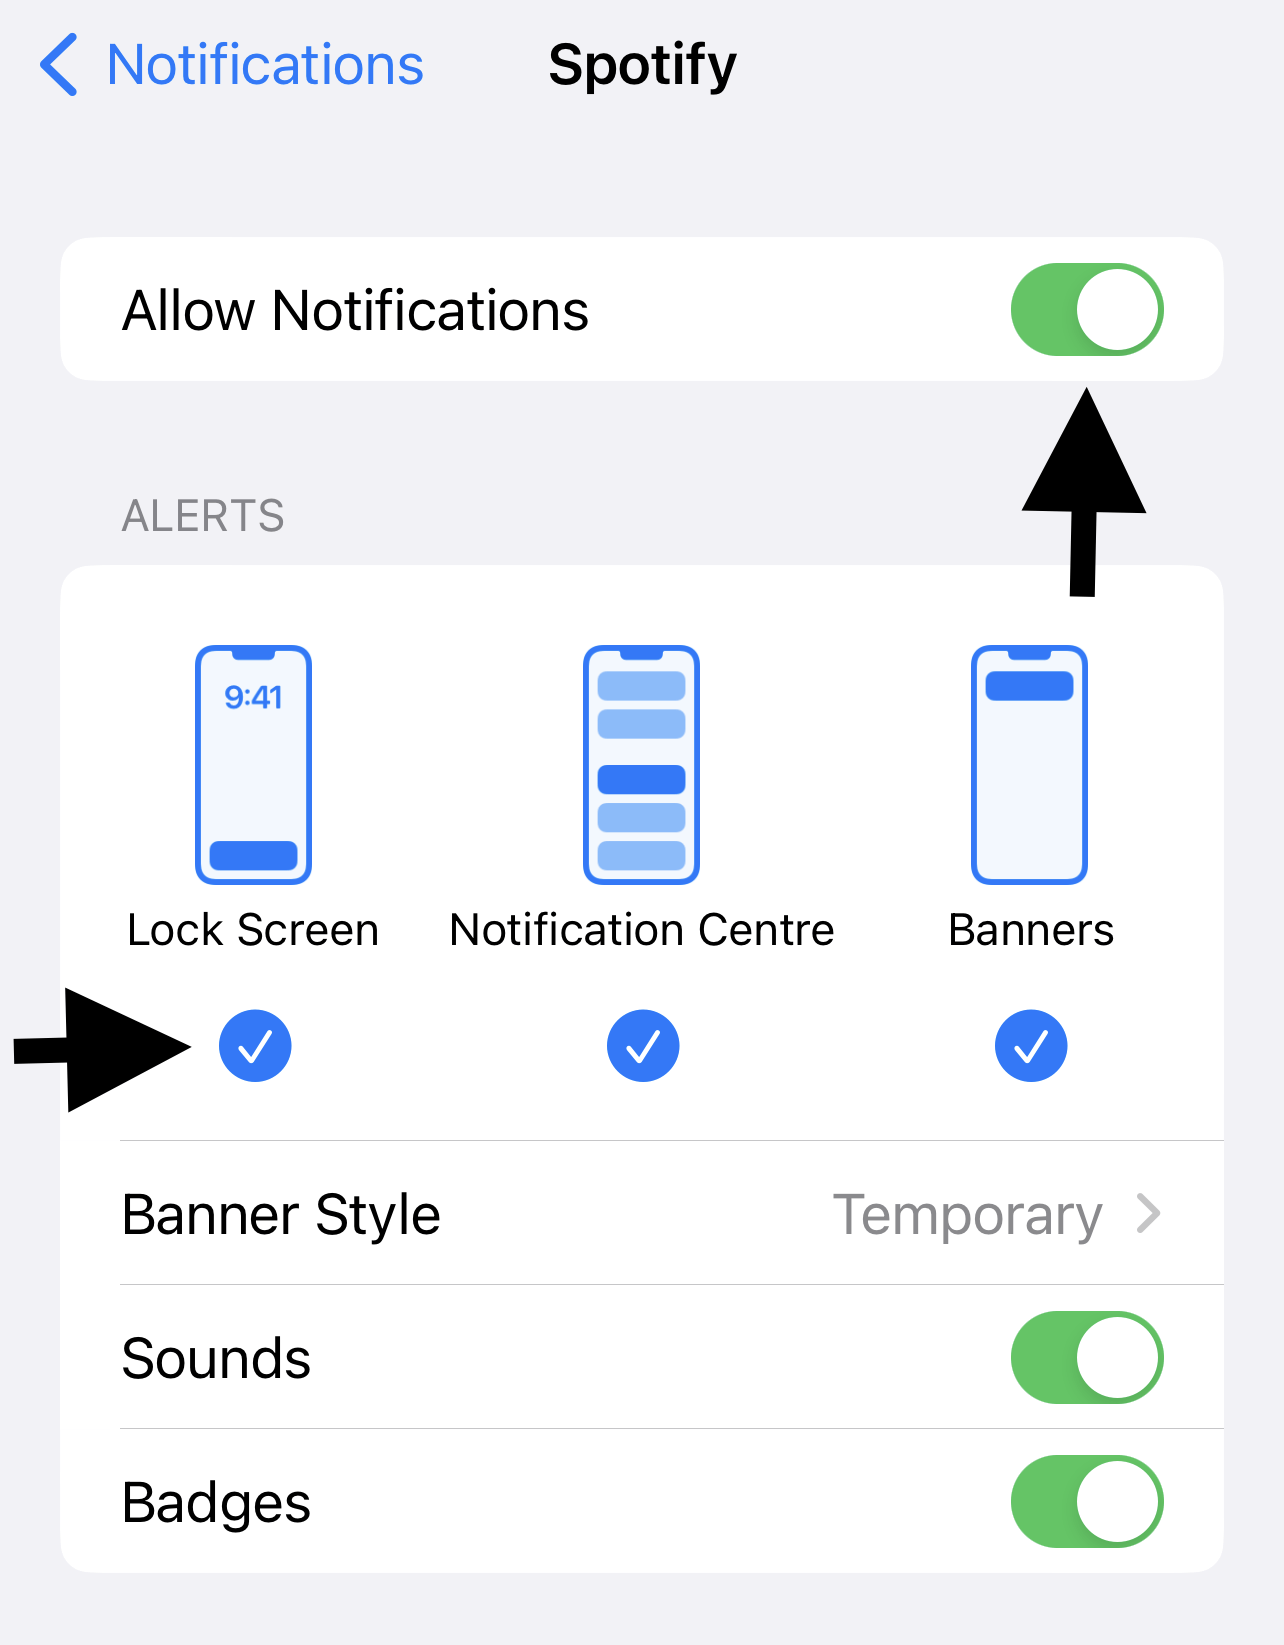 Let the app show controls on the lock screen on mobile